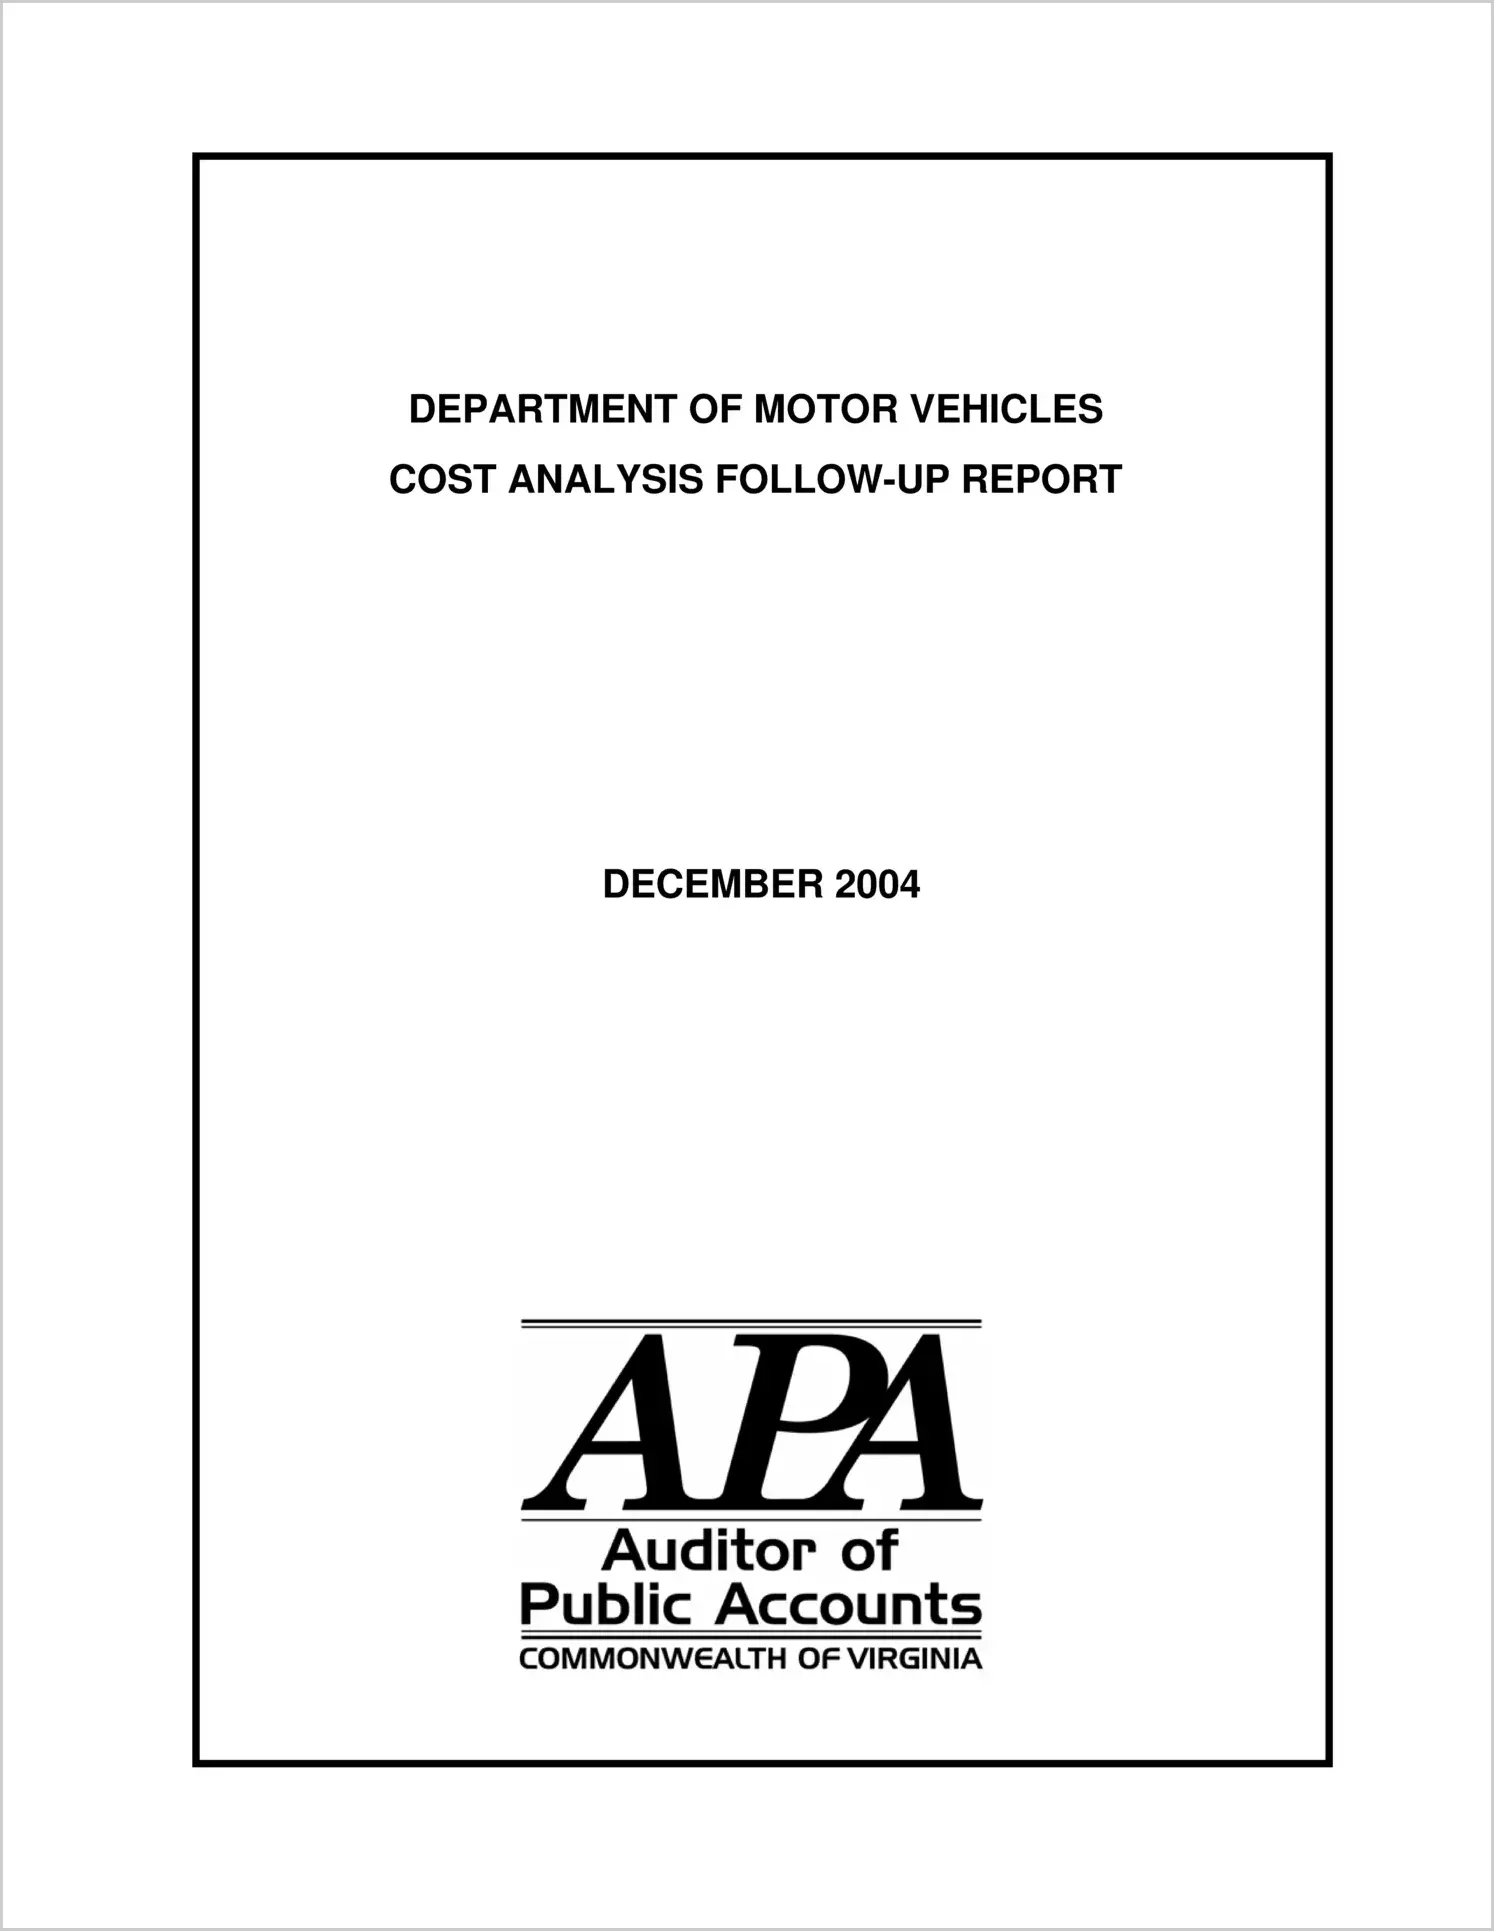 Special ReportDepartment of Motor Vehicles Cost Analysis Follow-Up Report(Report Date: December 2004)